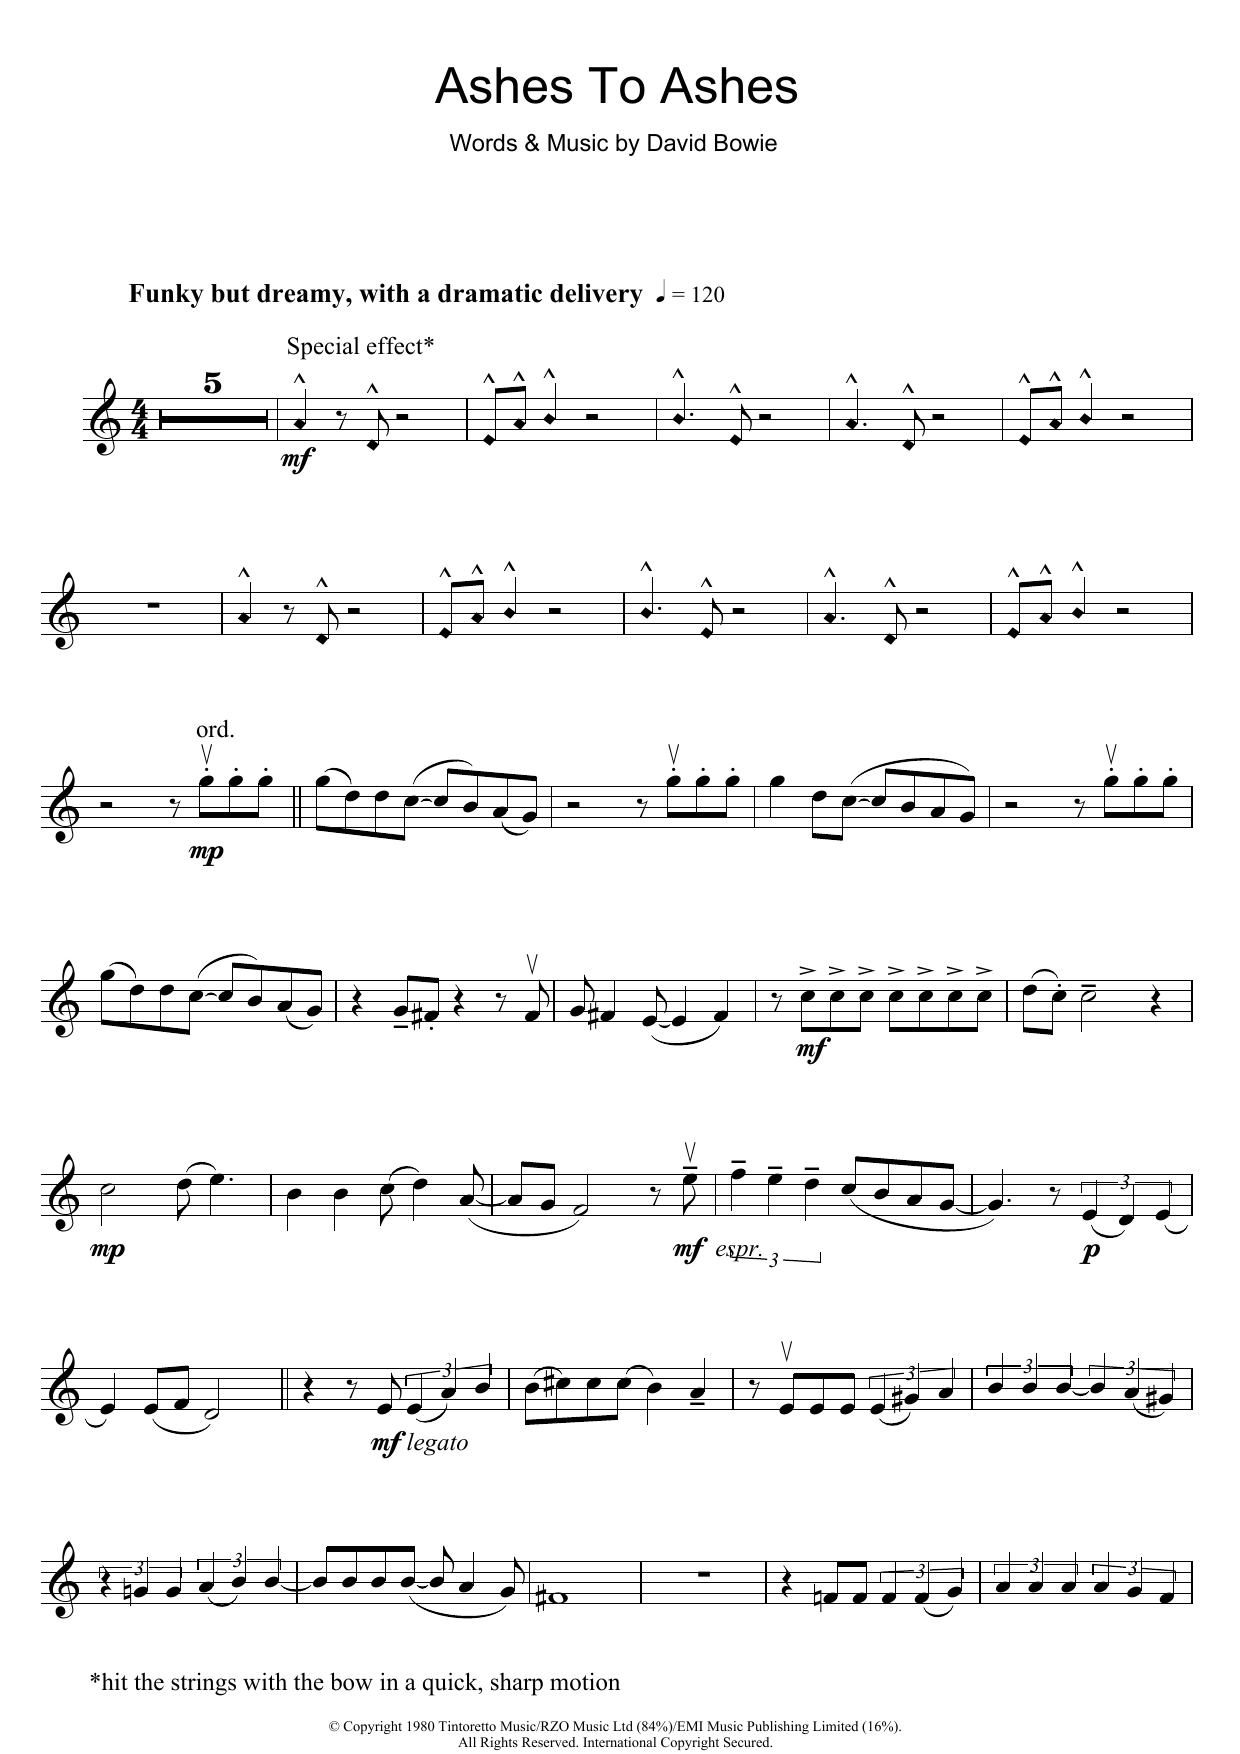 Download David Bowie Ashes To Ashes Sheet Music